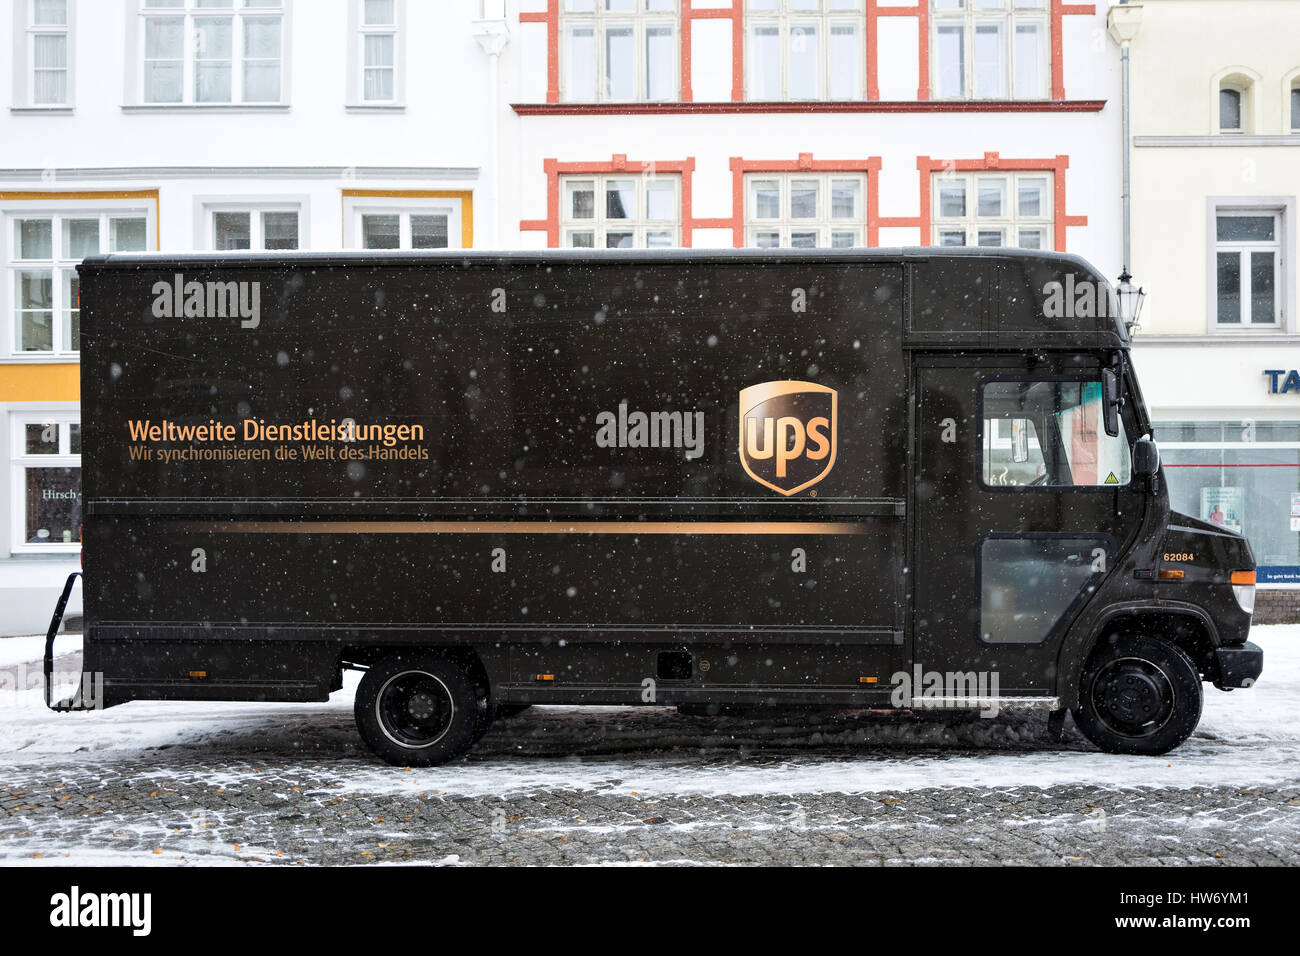 UPS delivery van during snowfall Stock Photo